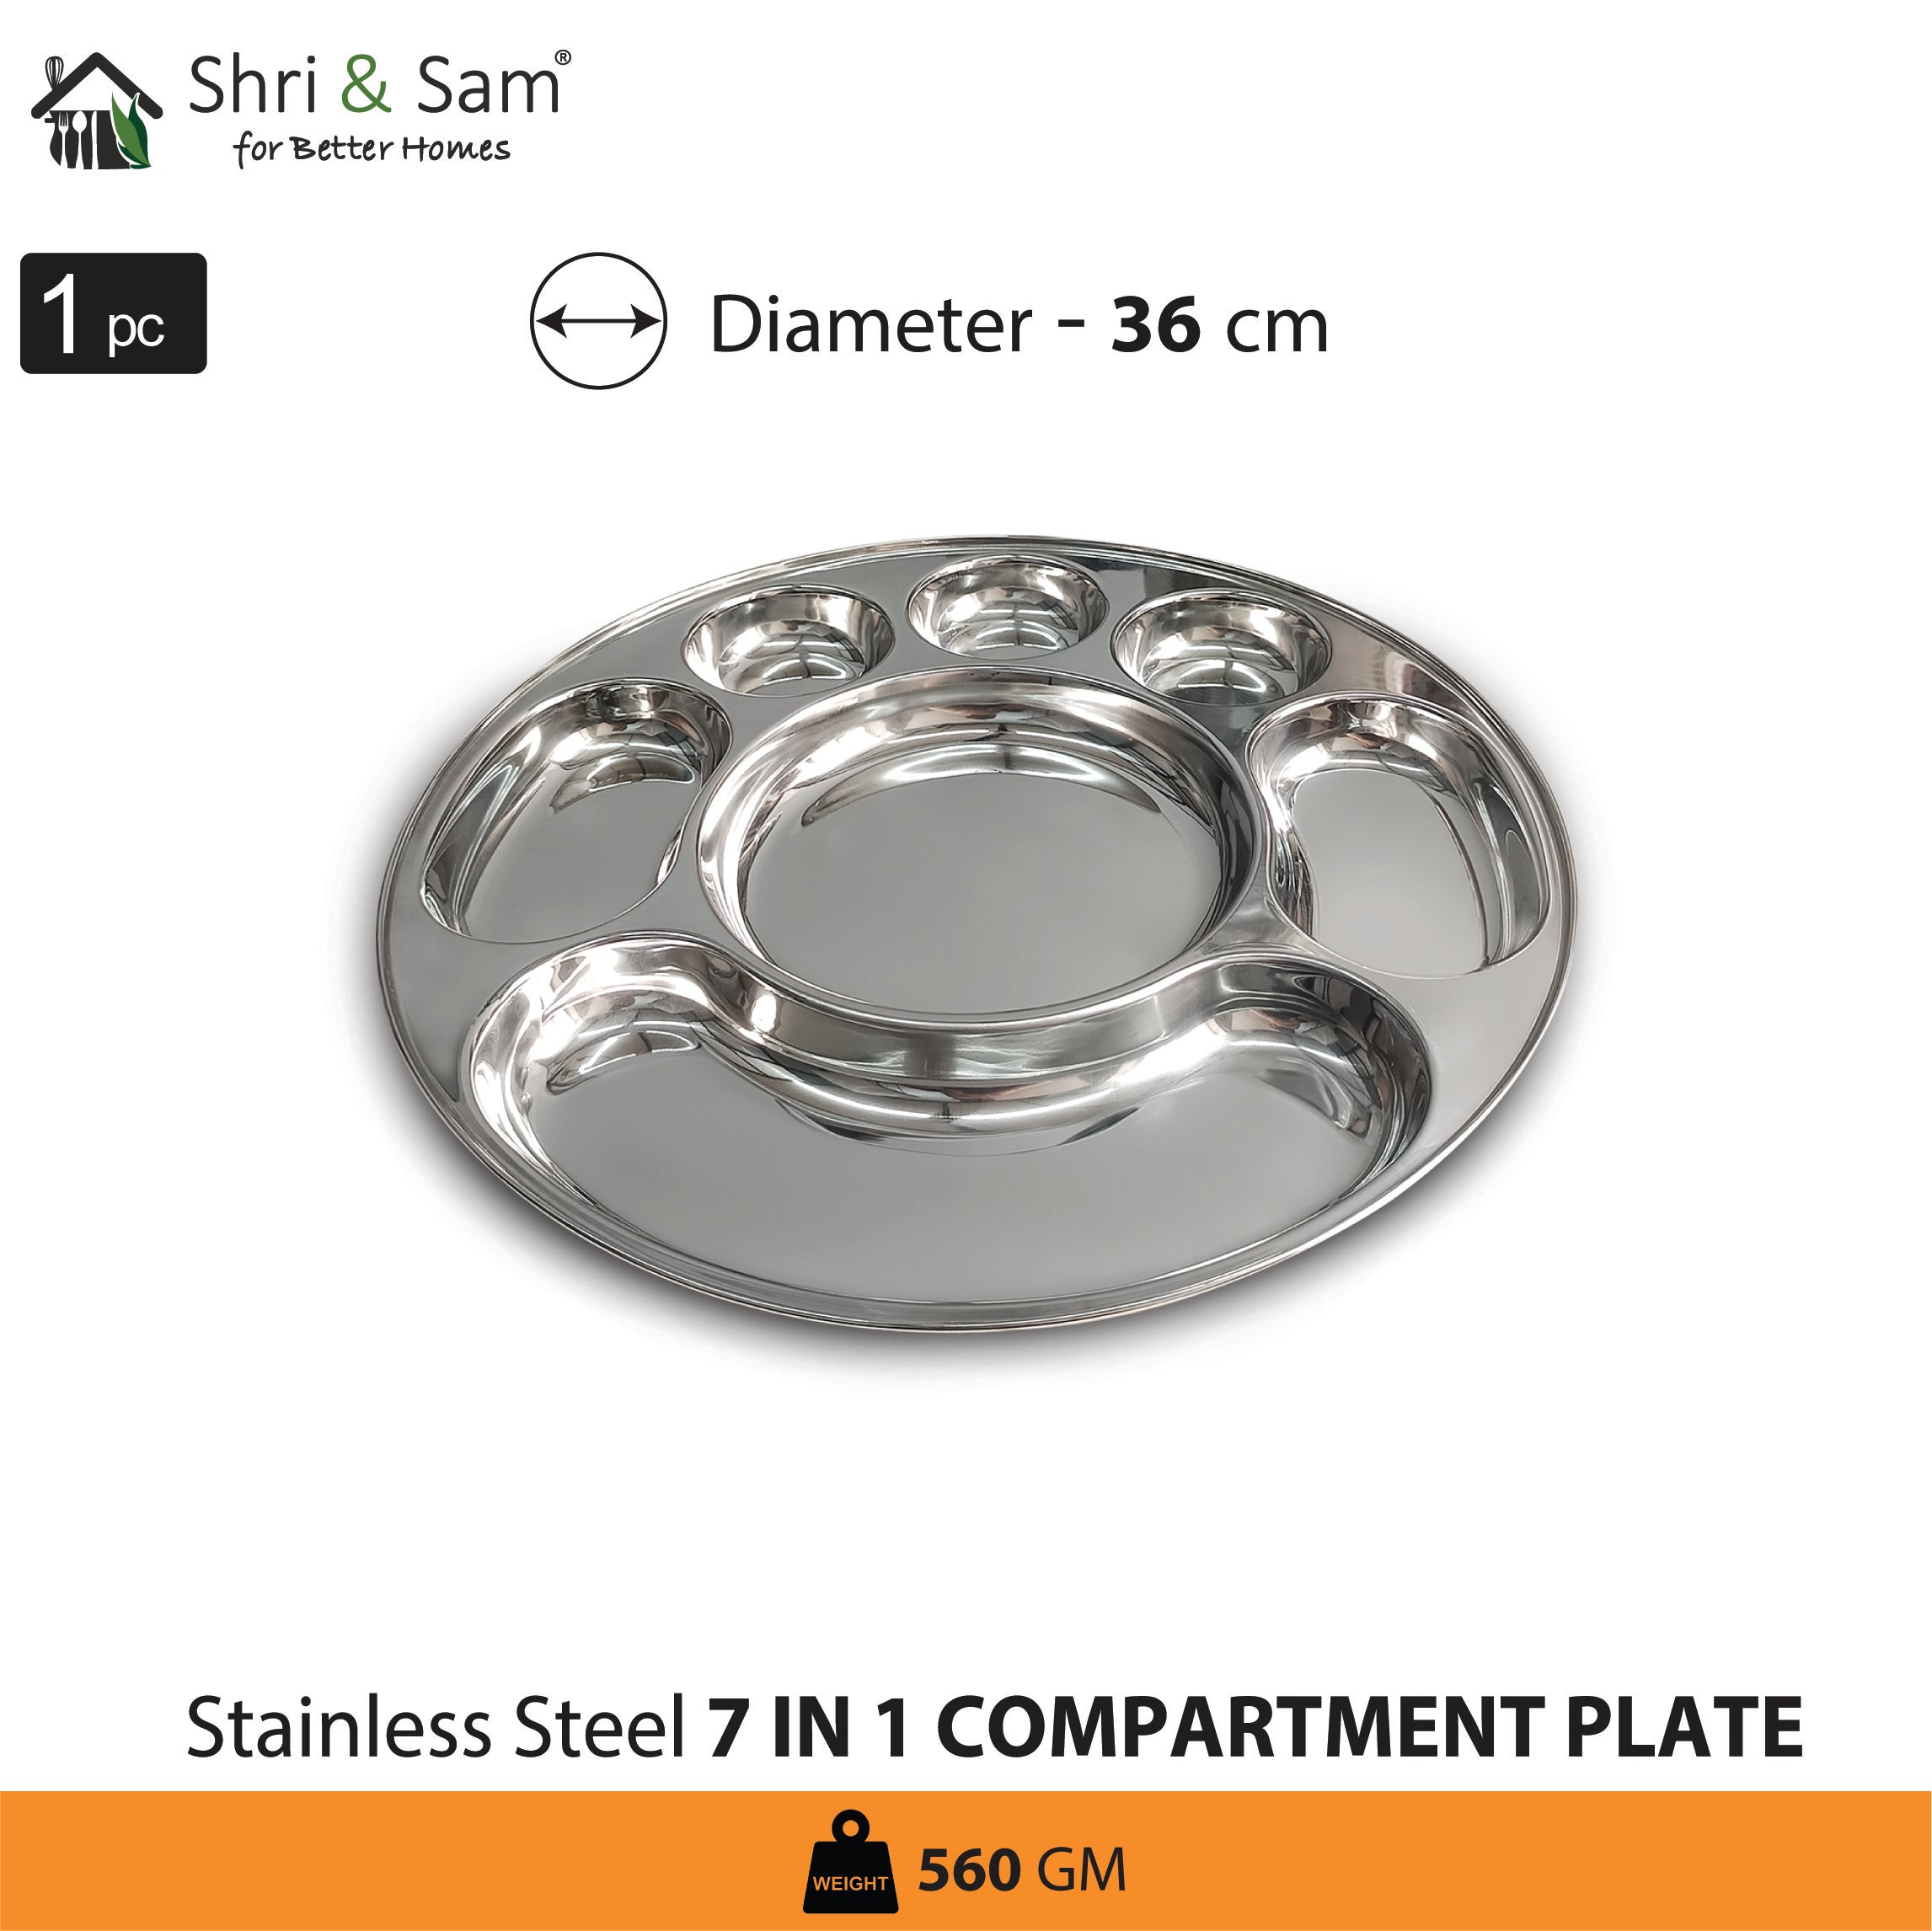 Stainless Steel 7 in 1 Compartment Plate